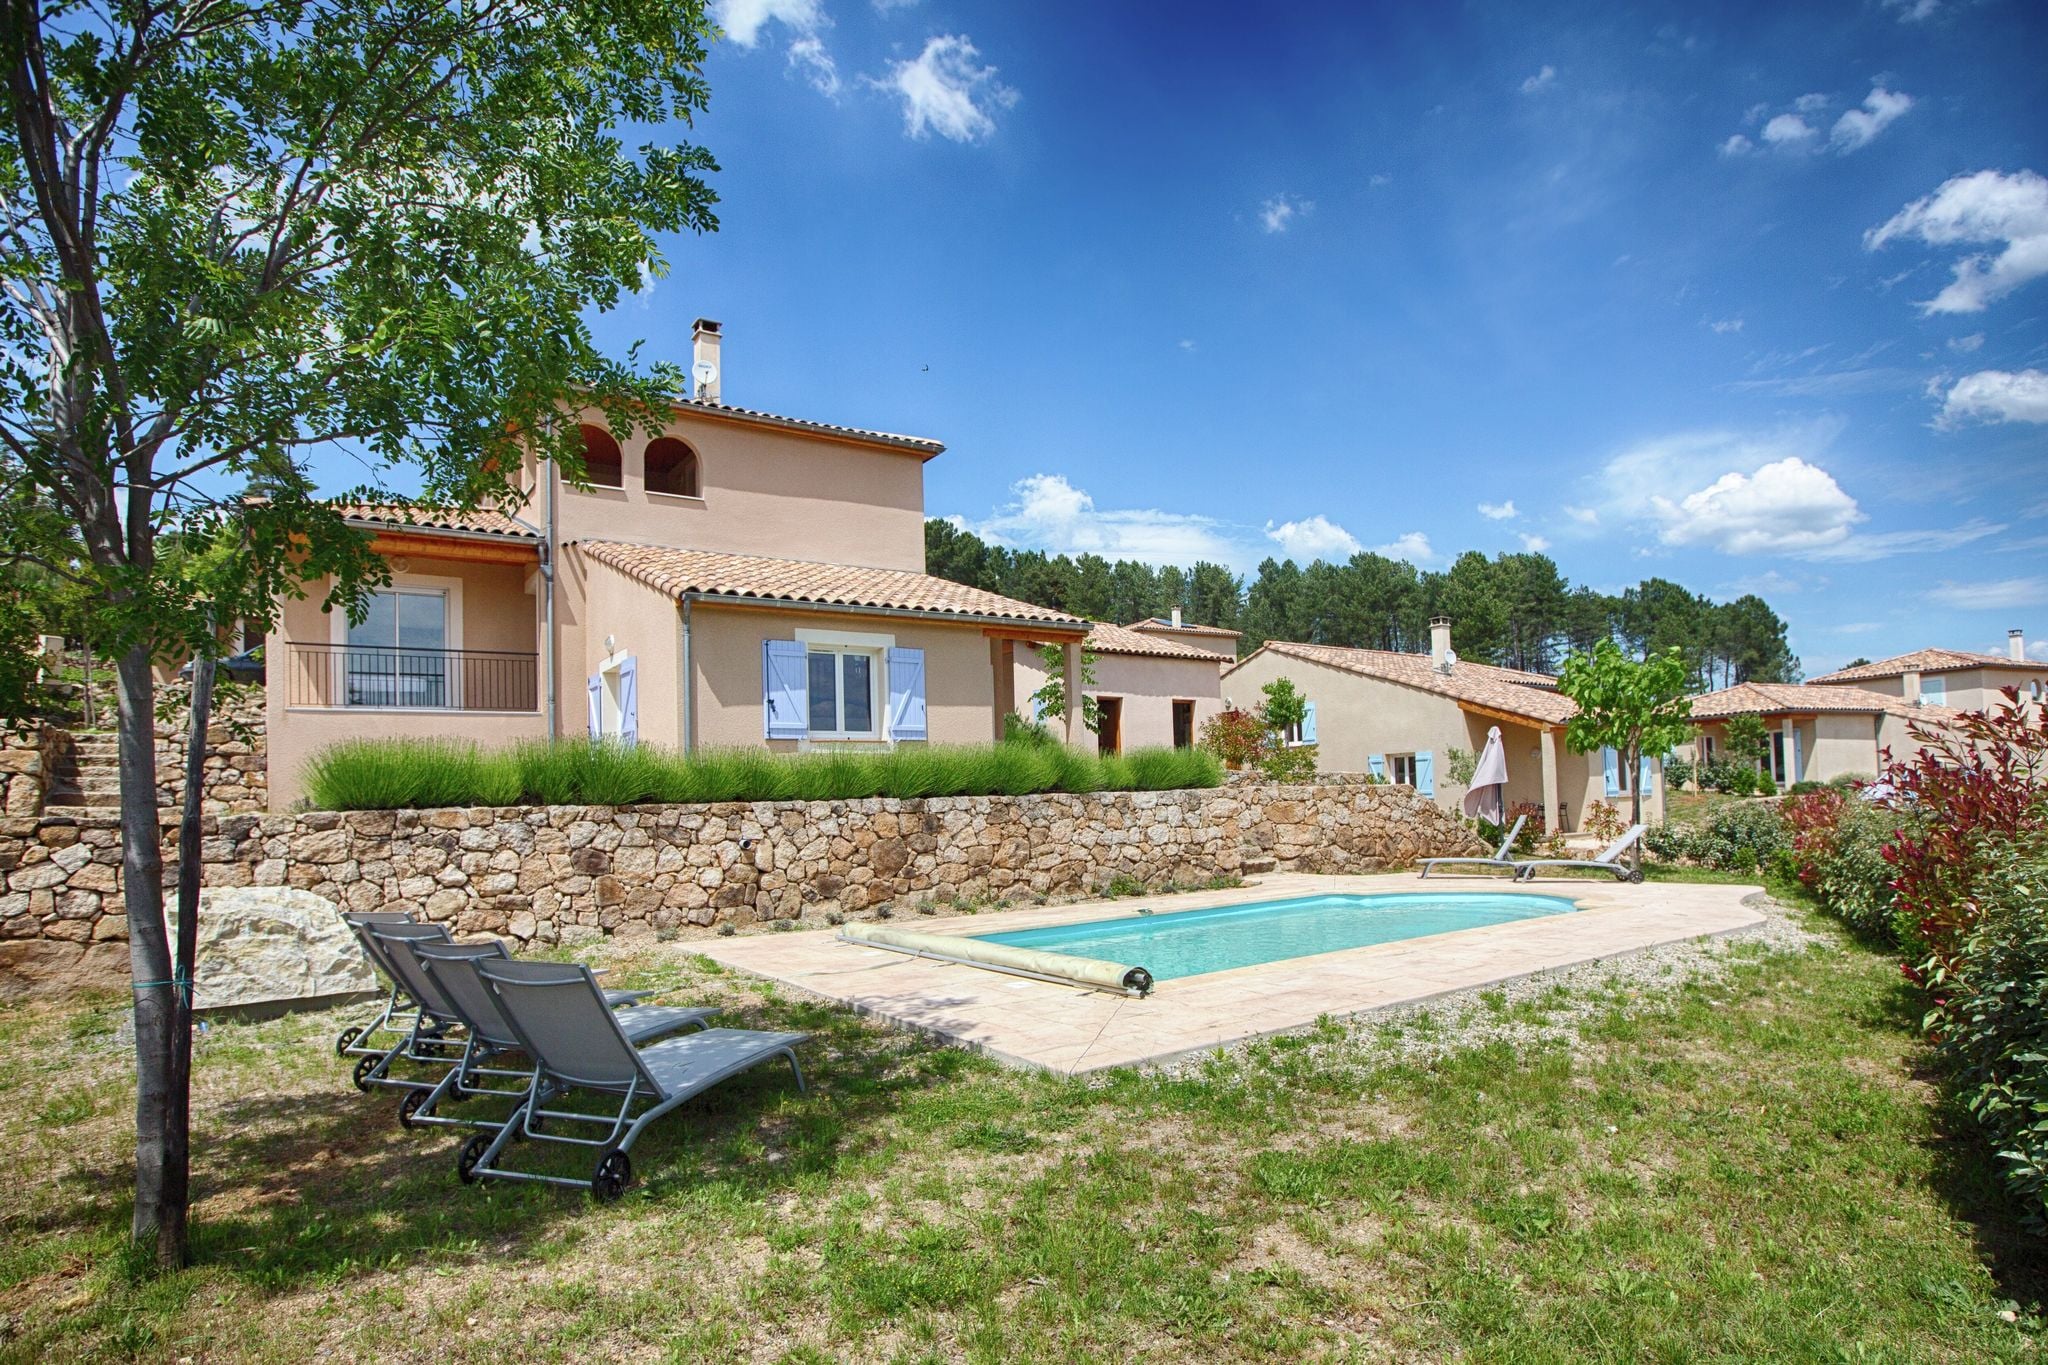 Beautifully located holiday villa with private swimming pool and lovely view!